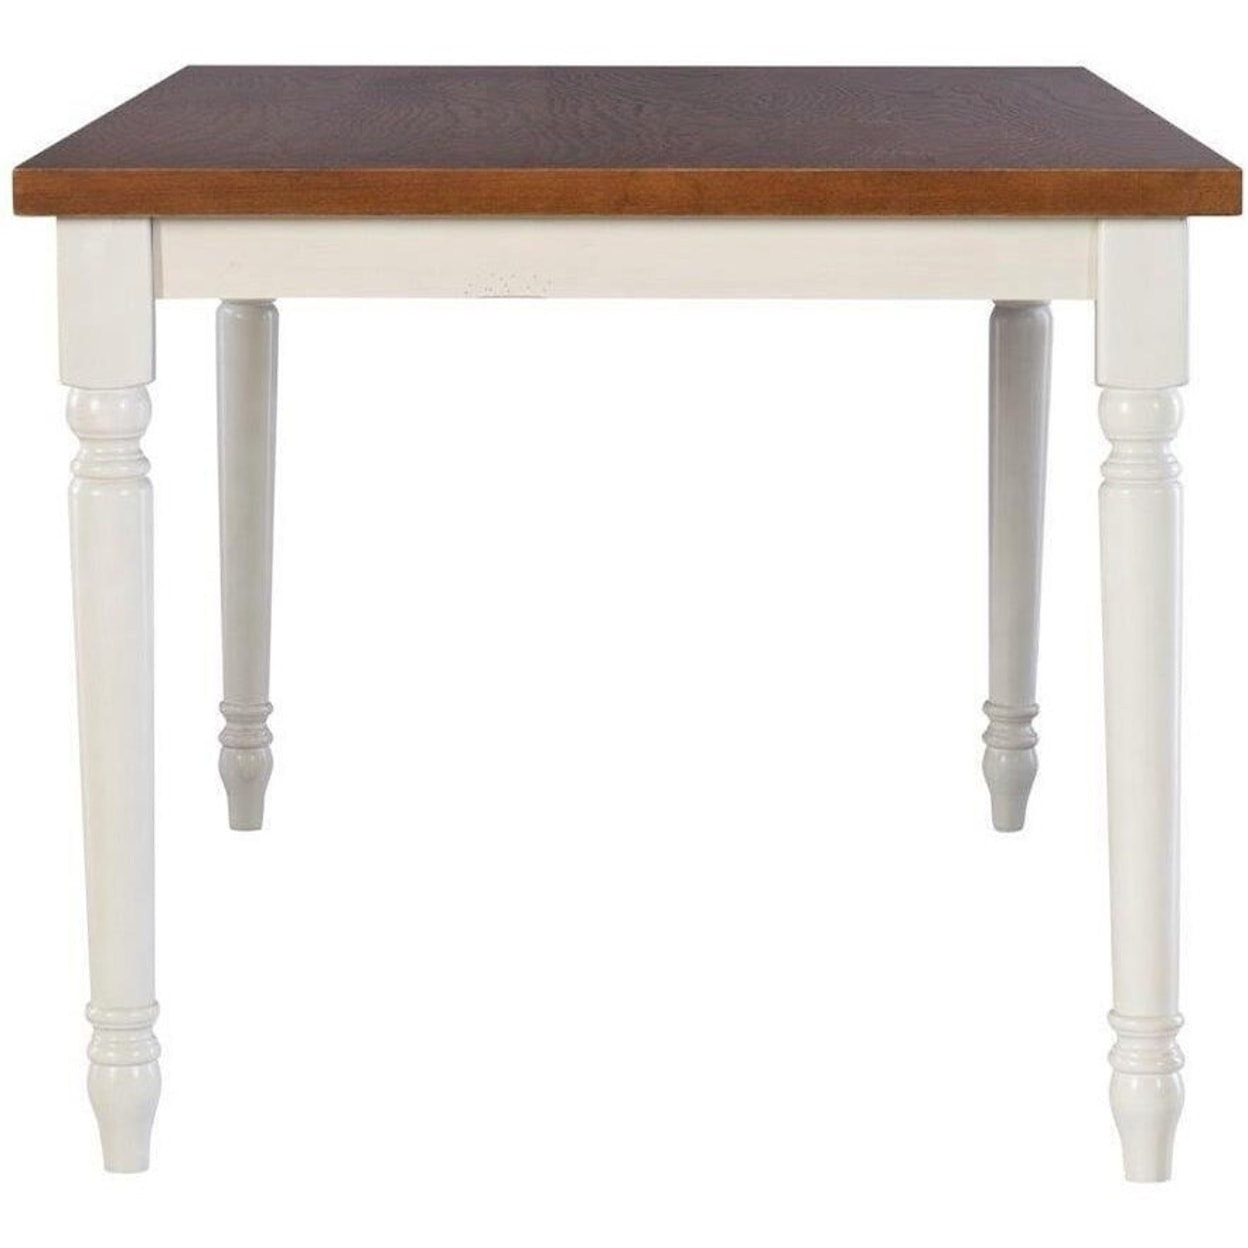 Powell Willow Willow Dining Table